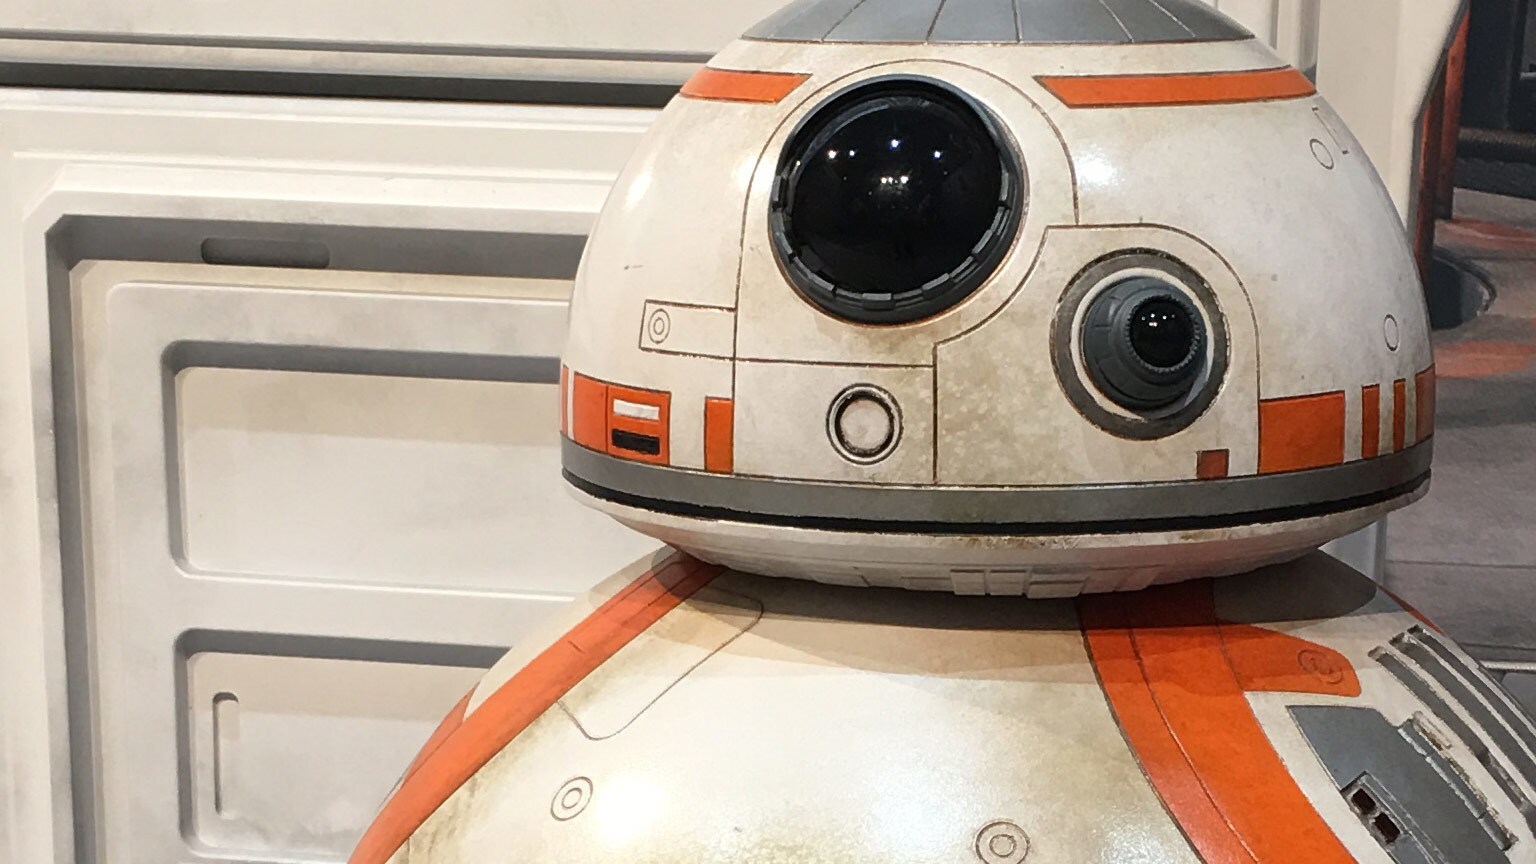 Star Wars: The Last Jedi Props and Costumes on Display at SDCC